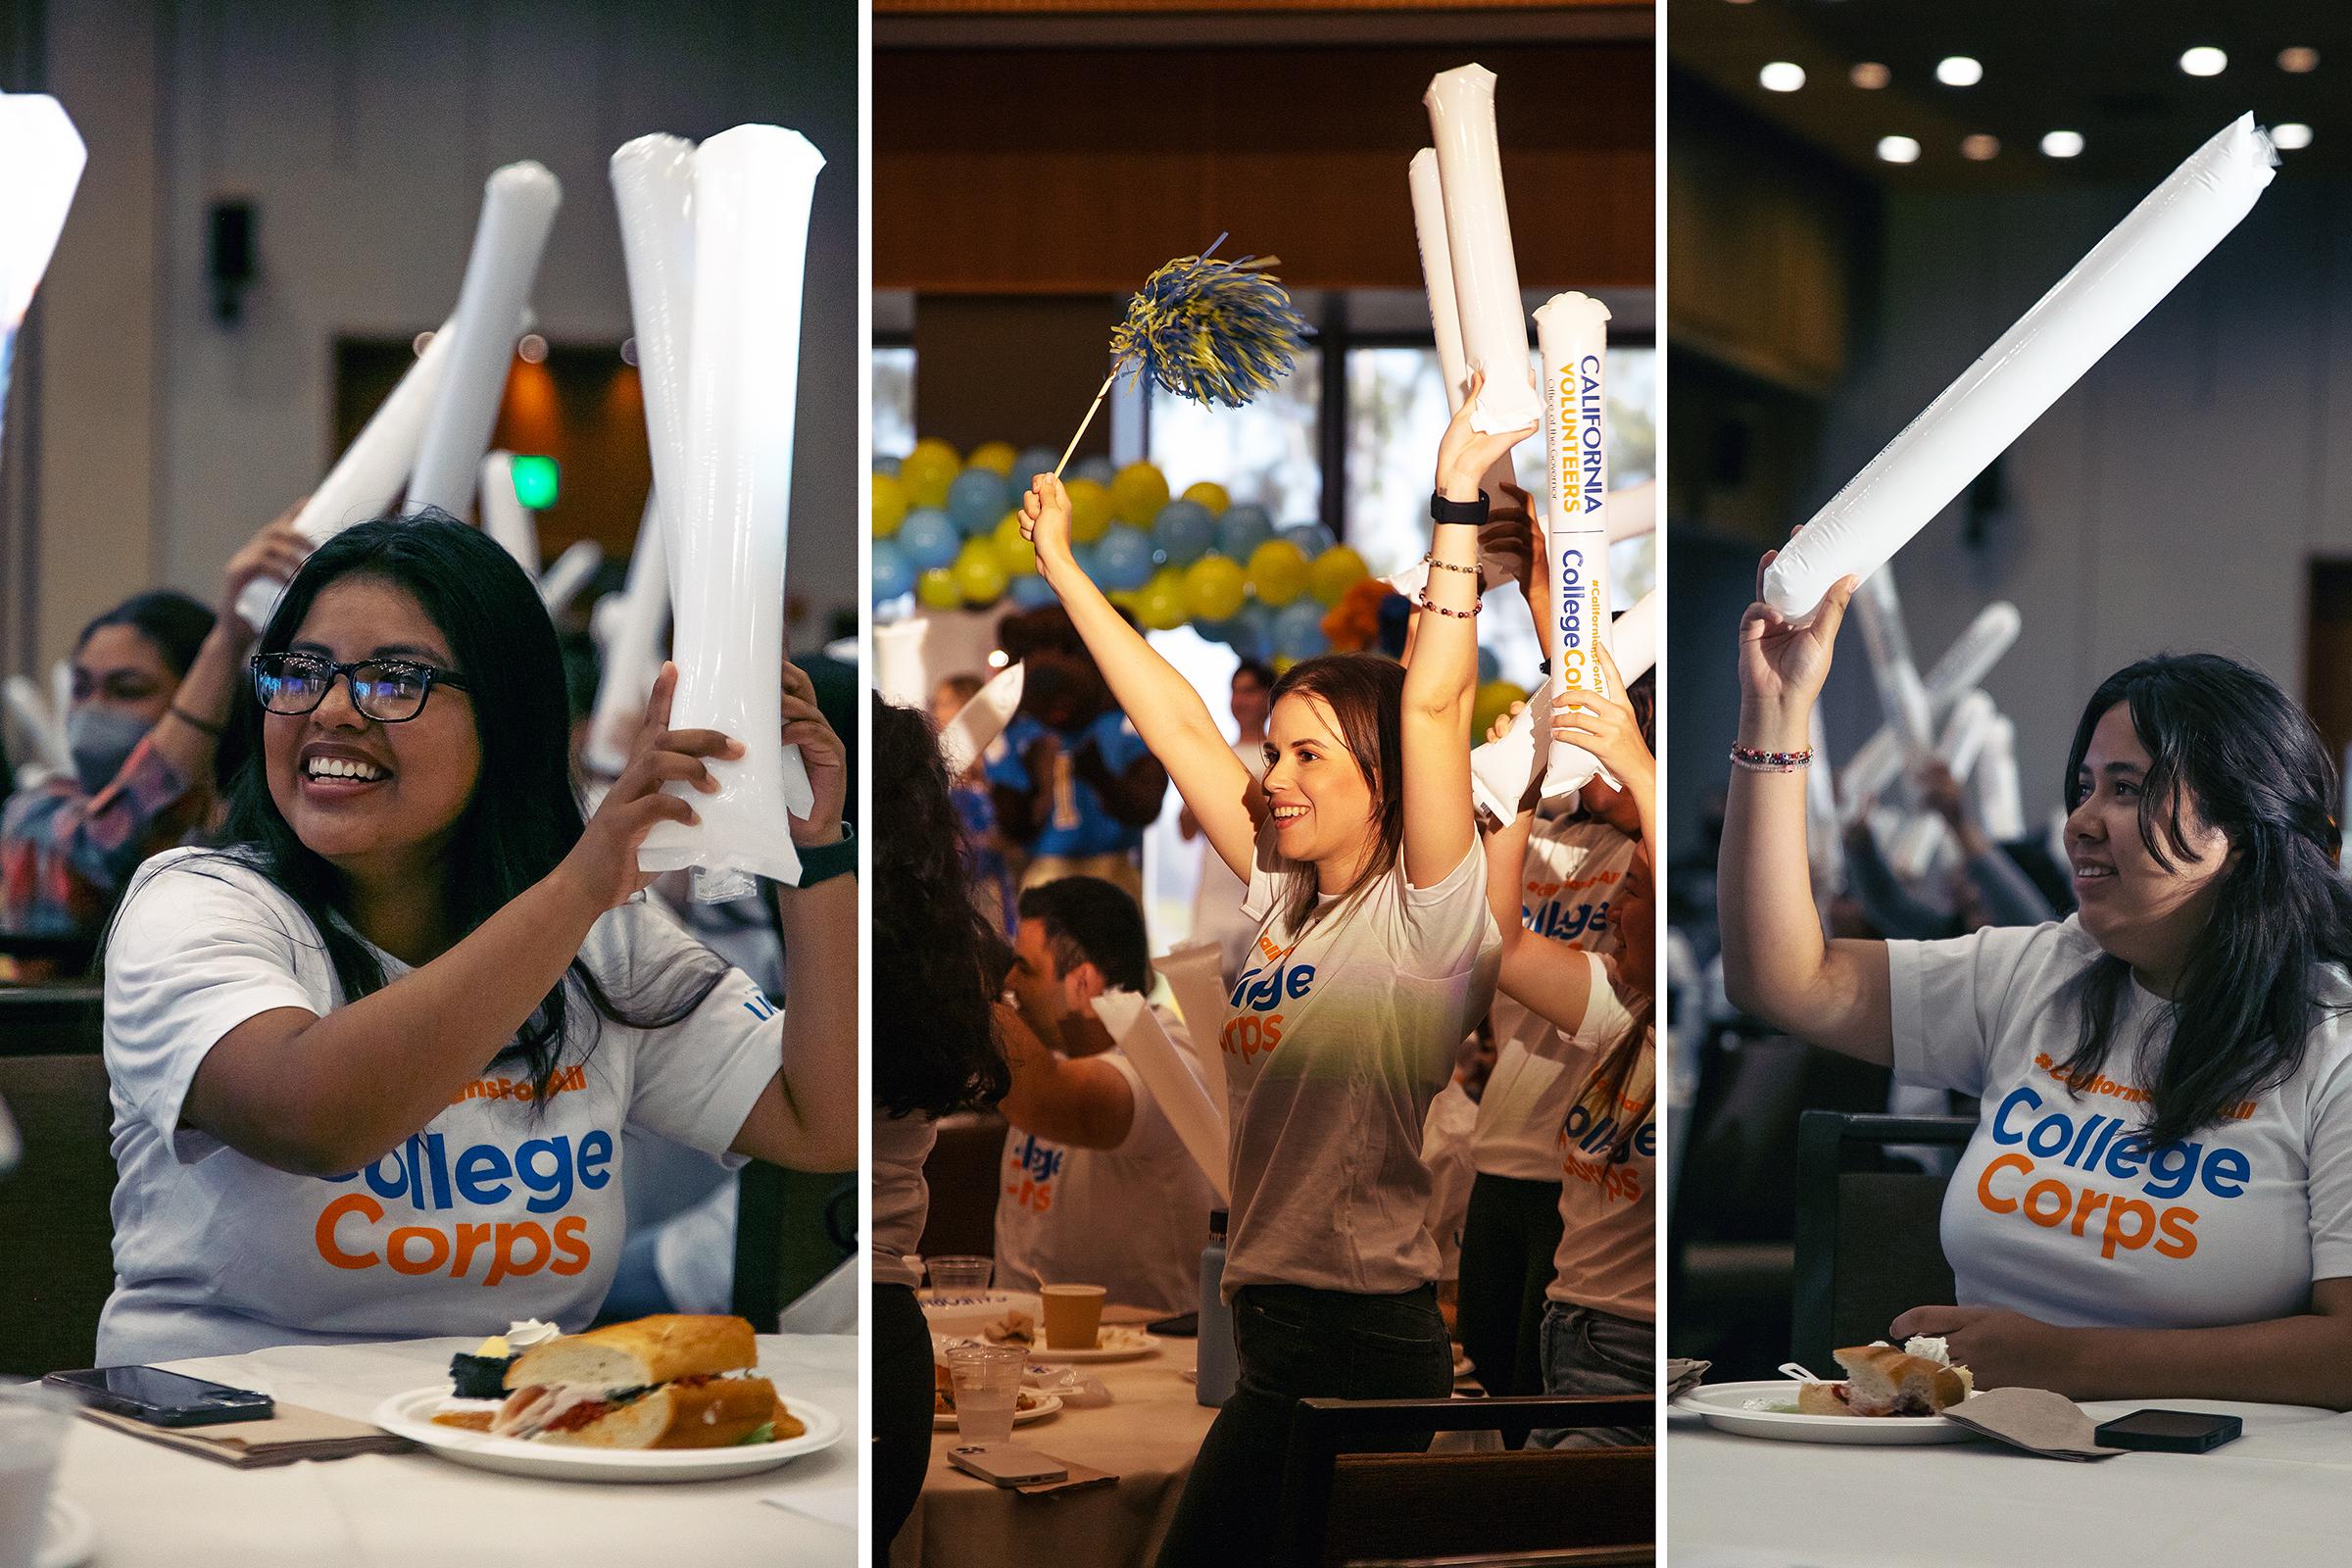 3 images of a young Latinx woman, white woman, and another Latinx woman in a white t-shirts which reads, "College Corps" waving white thundersticks in celebration.